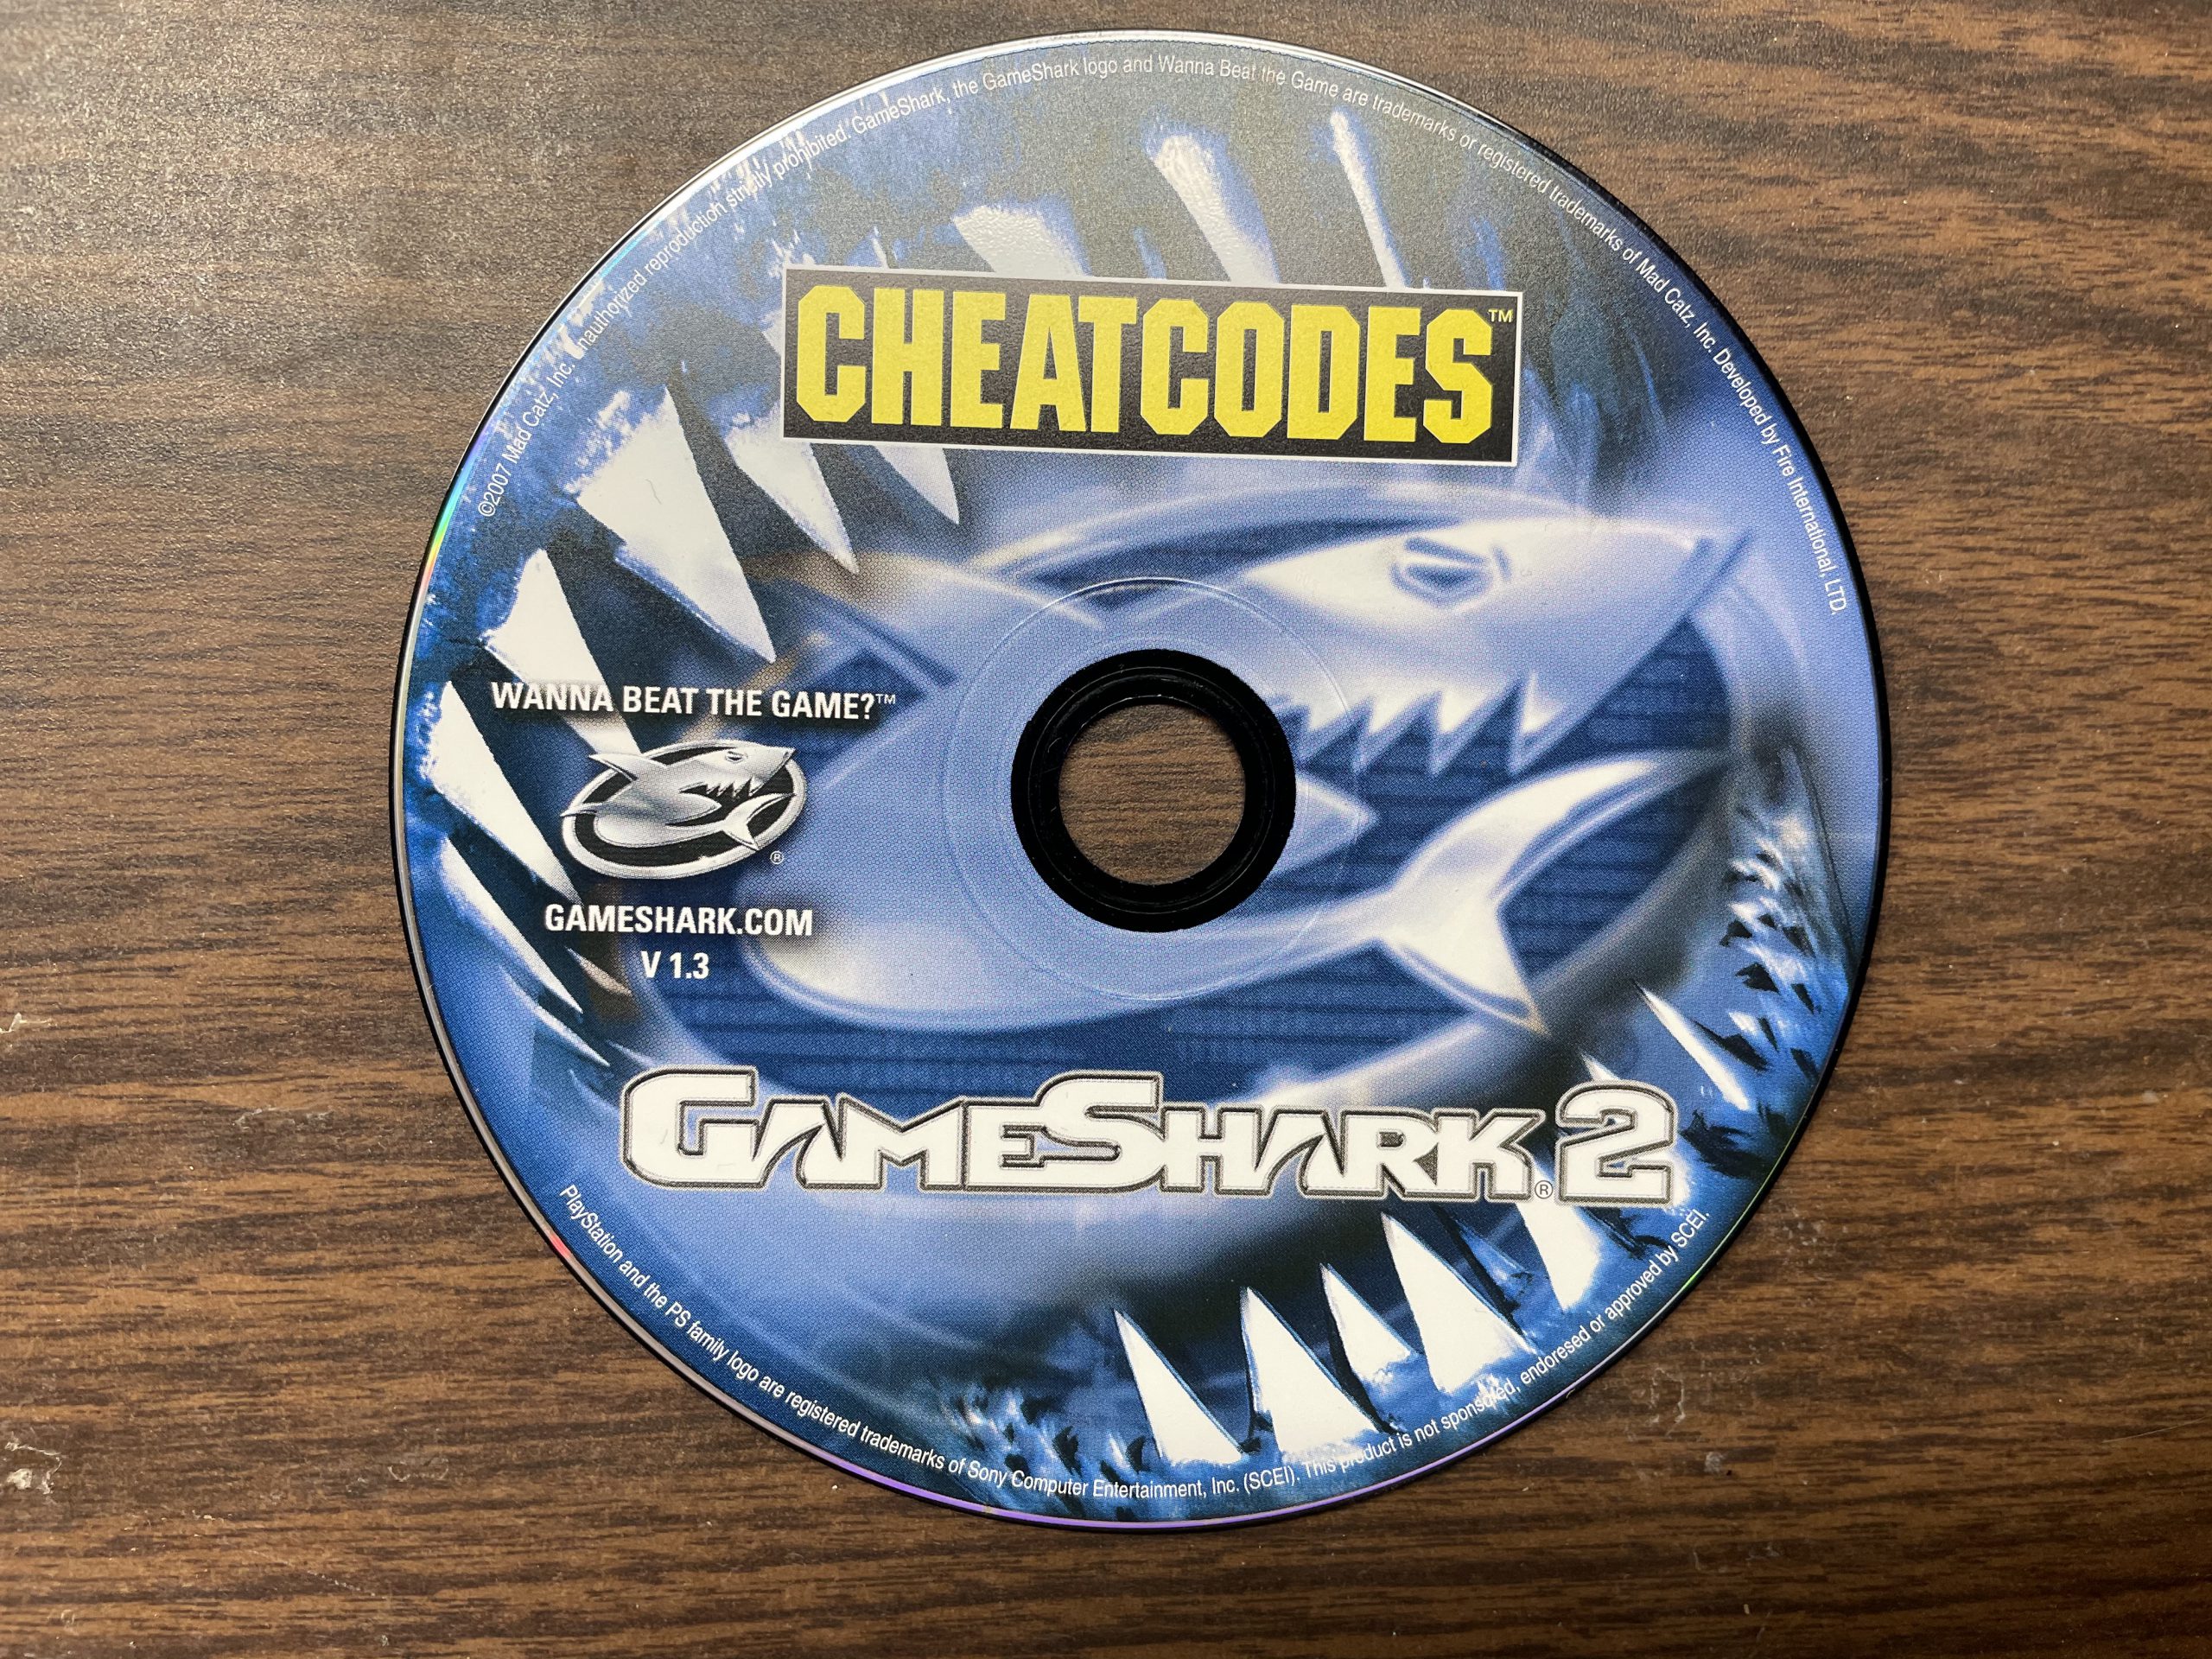 how to use gameshark for ps2 